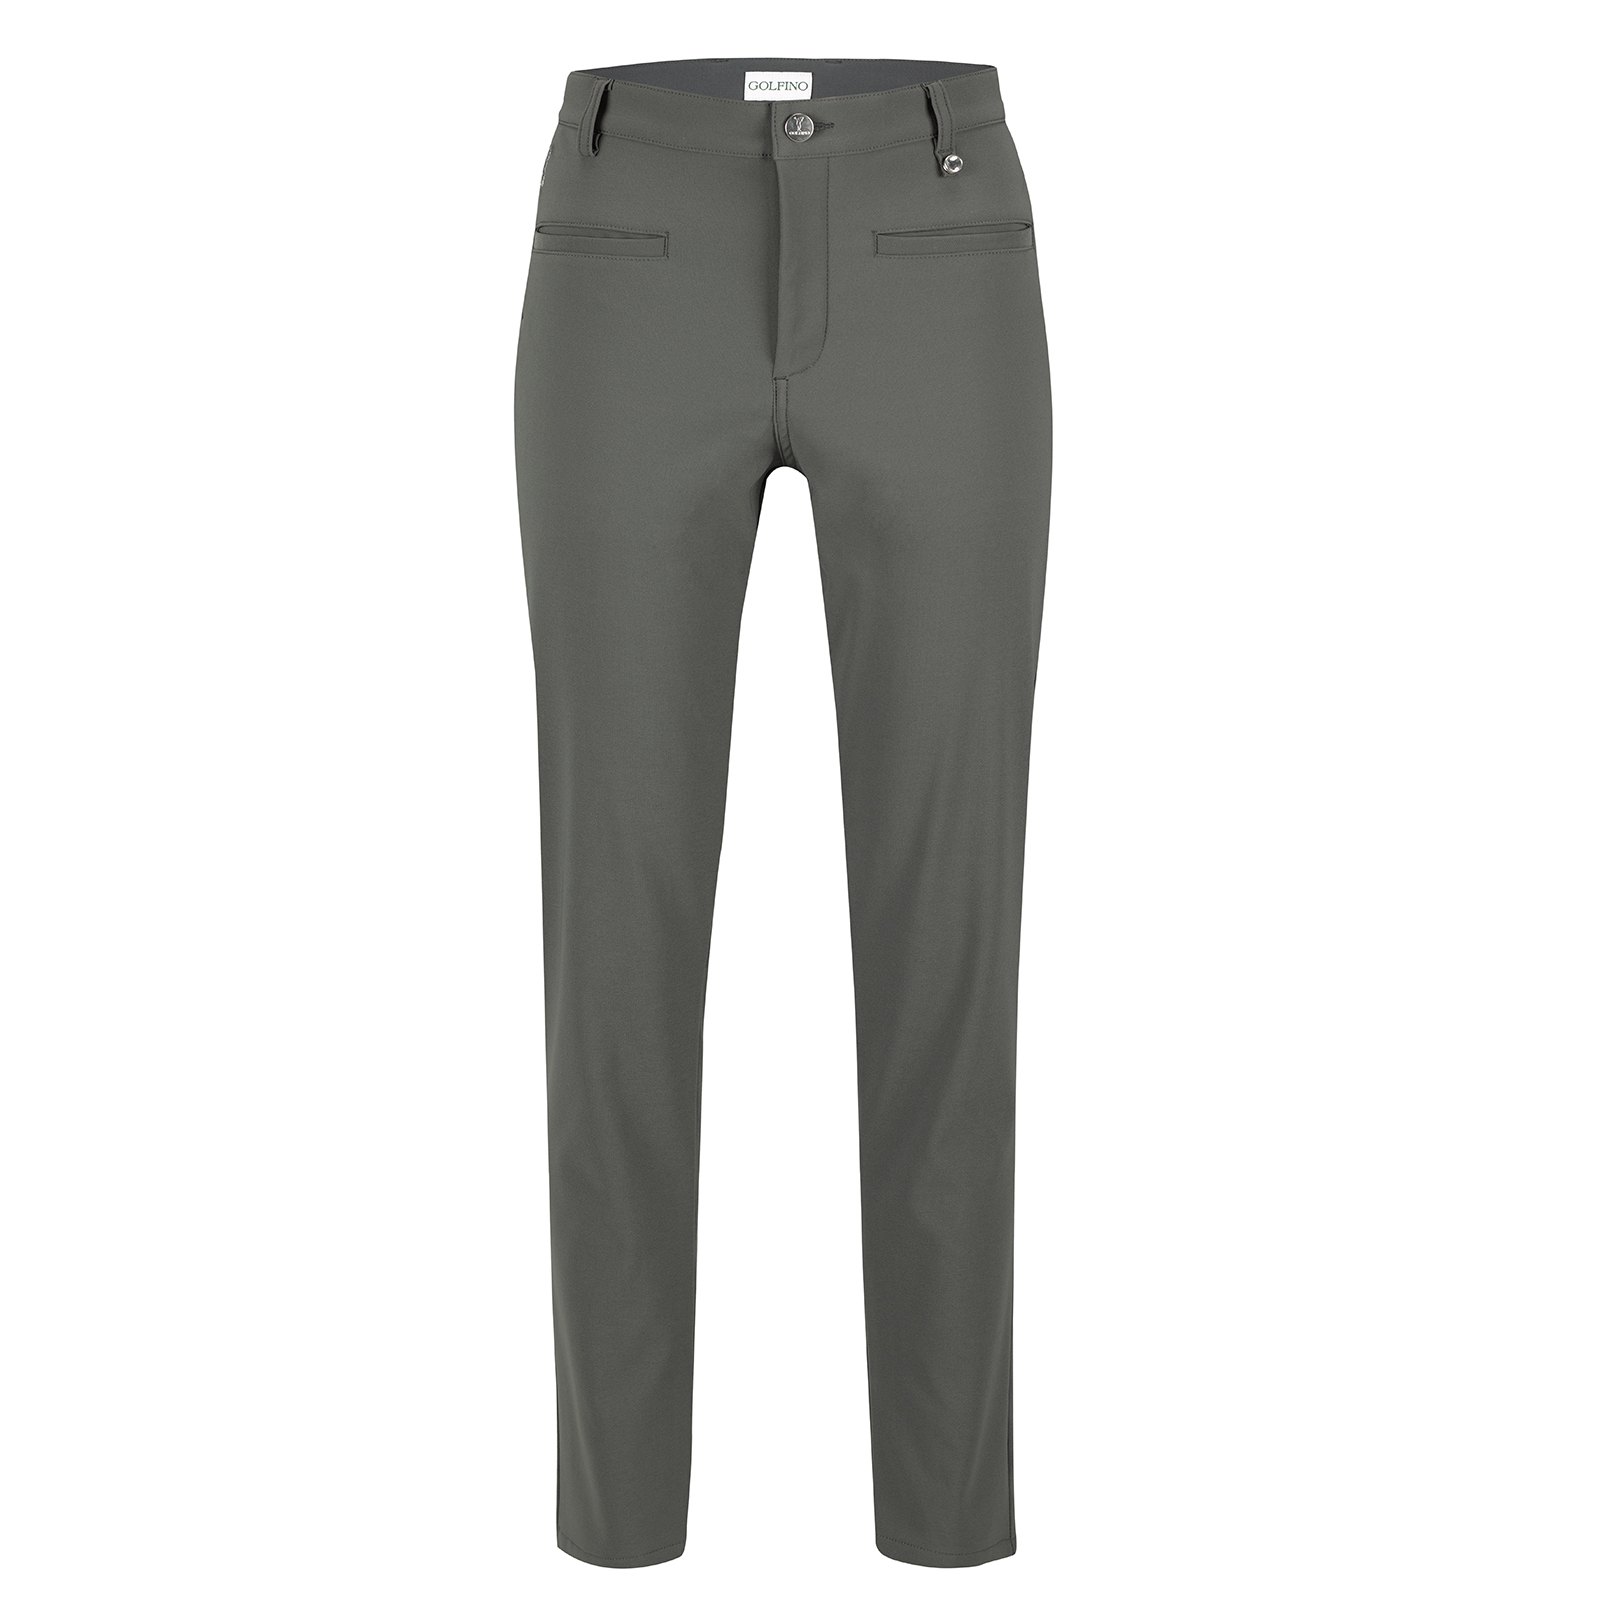 Ladies' 7/8 slim fit golf trousers with 4-way-stretch